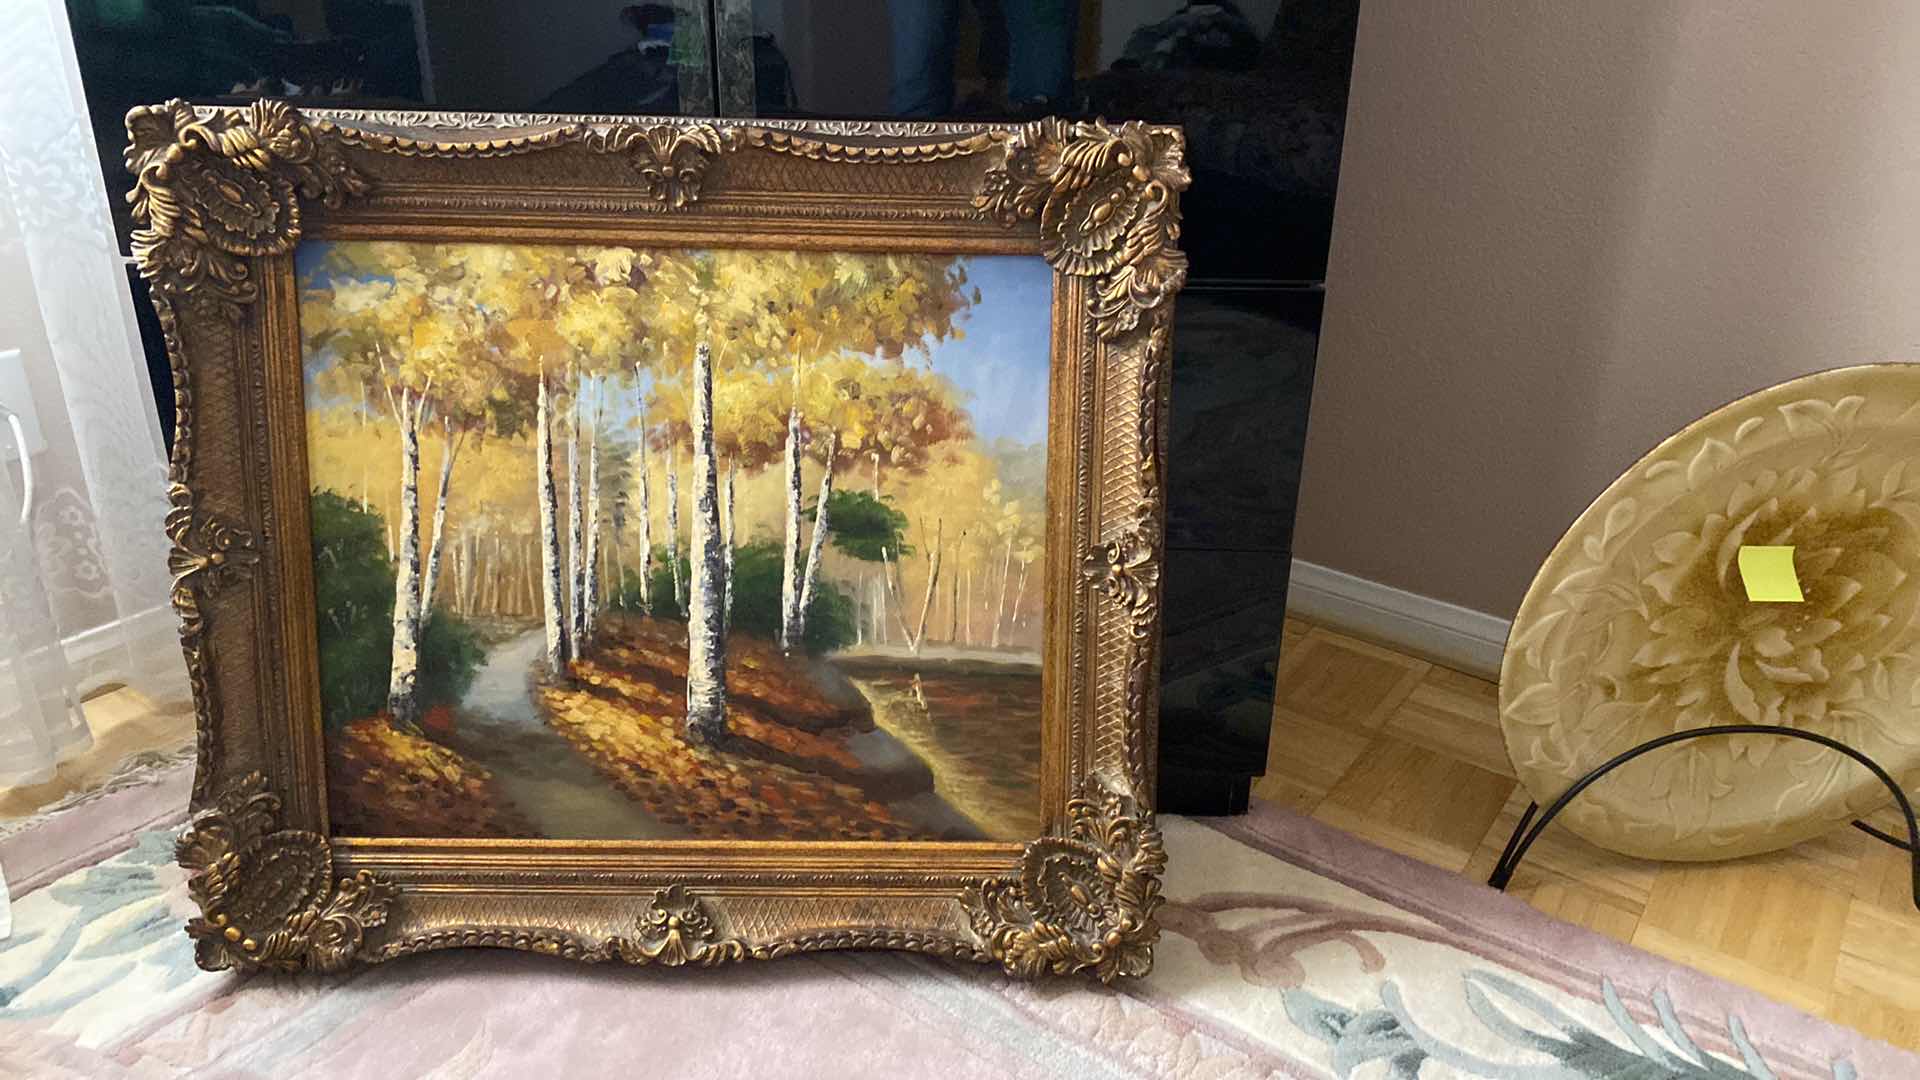 Photo 2 of ORNATE FRAMED ARTWORK, OIL PAINTING LANDSCAPE WITH TREES 32” X 27”